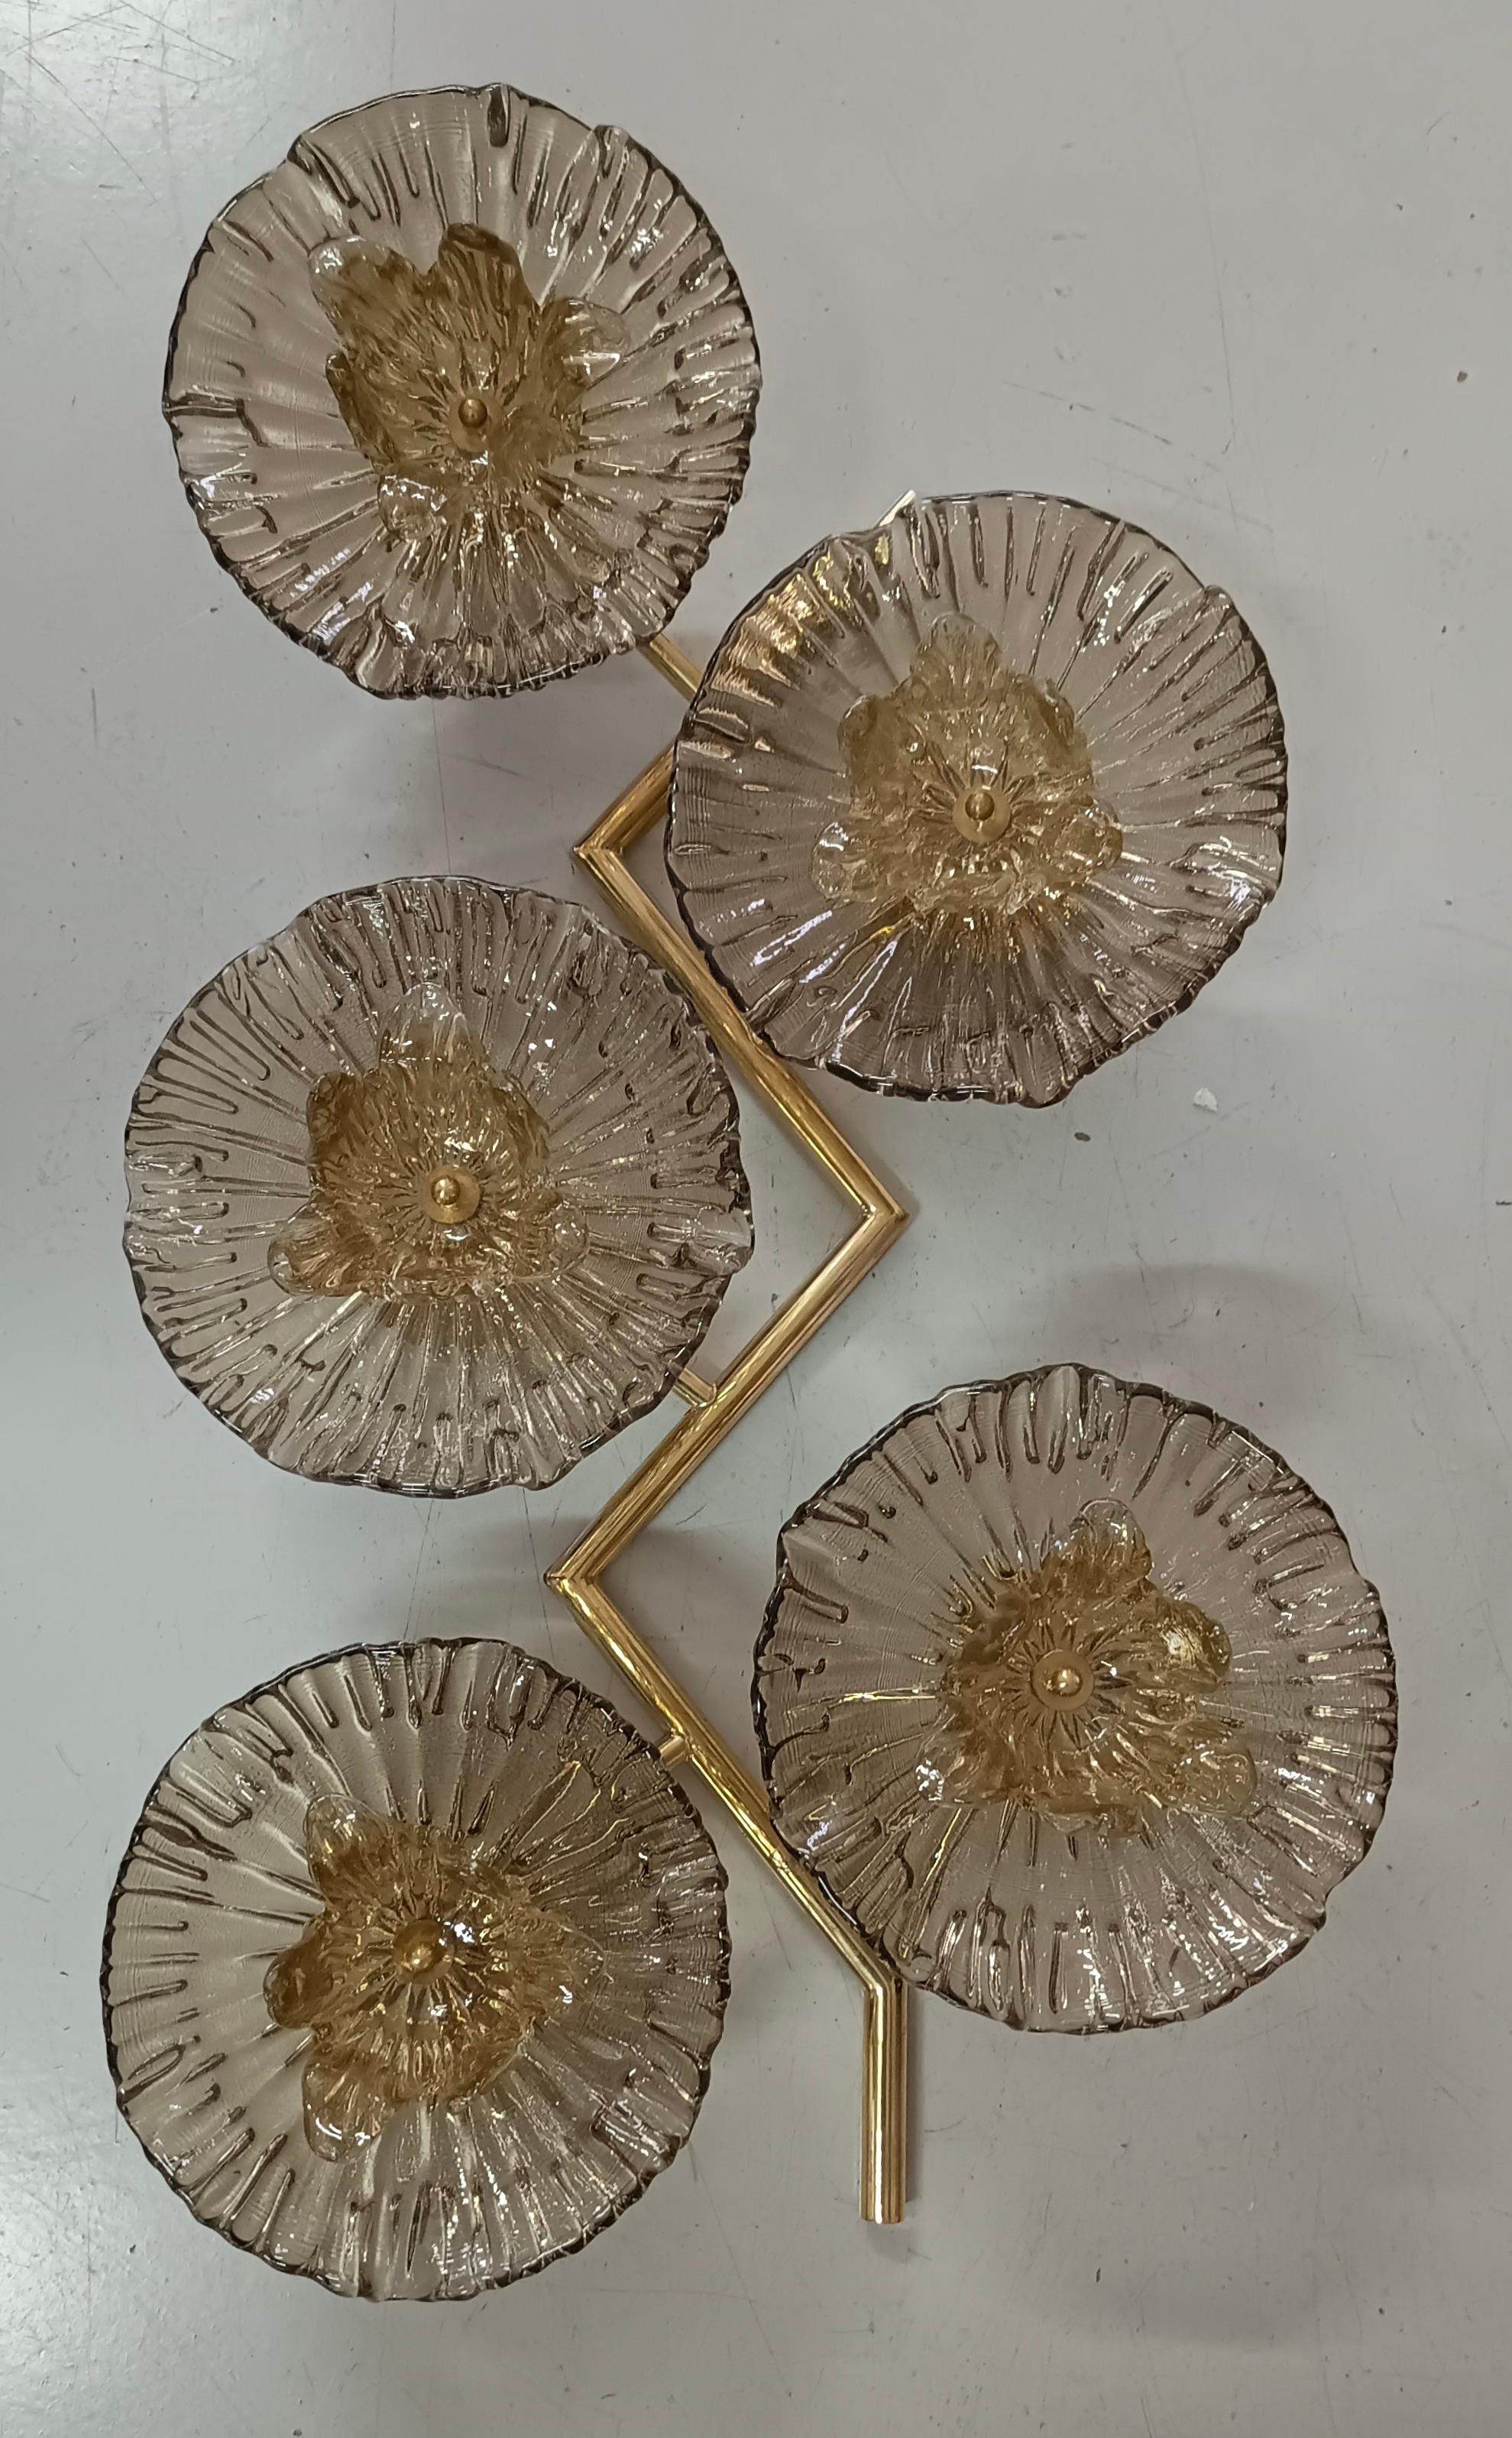 Wonderful piece in Murano glass, a delicious applique with an entirely Italian flavour. Particular and original applique from the Murano glass factory.

The wall light has a brass structure, in the shape of a climbing plant. Amber Murano glass